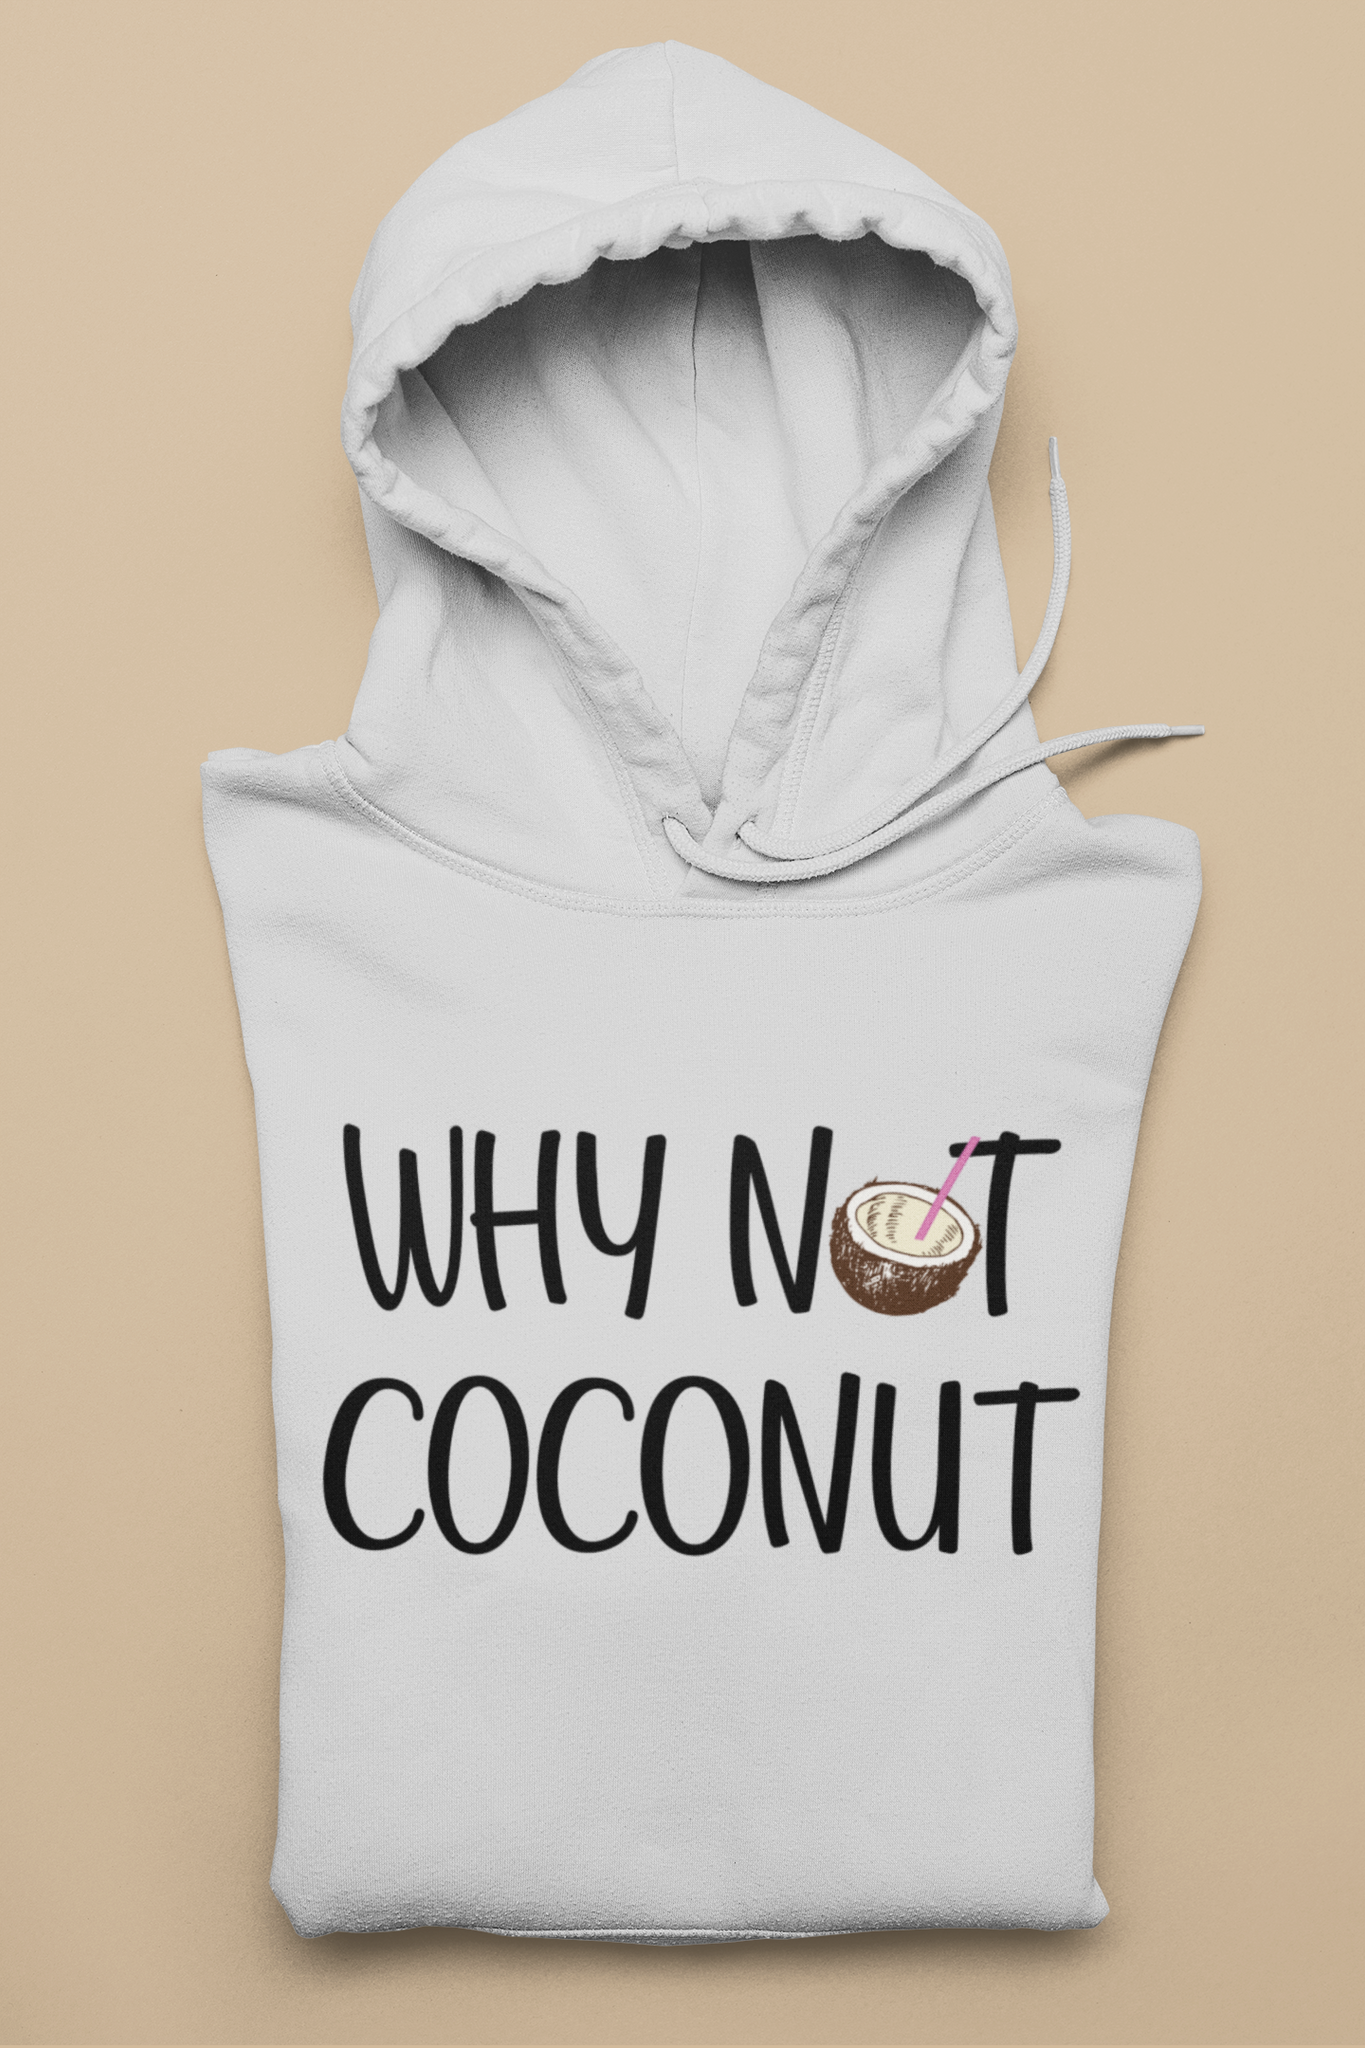 Kangourou - Why not coconut